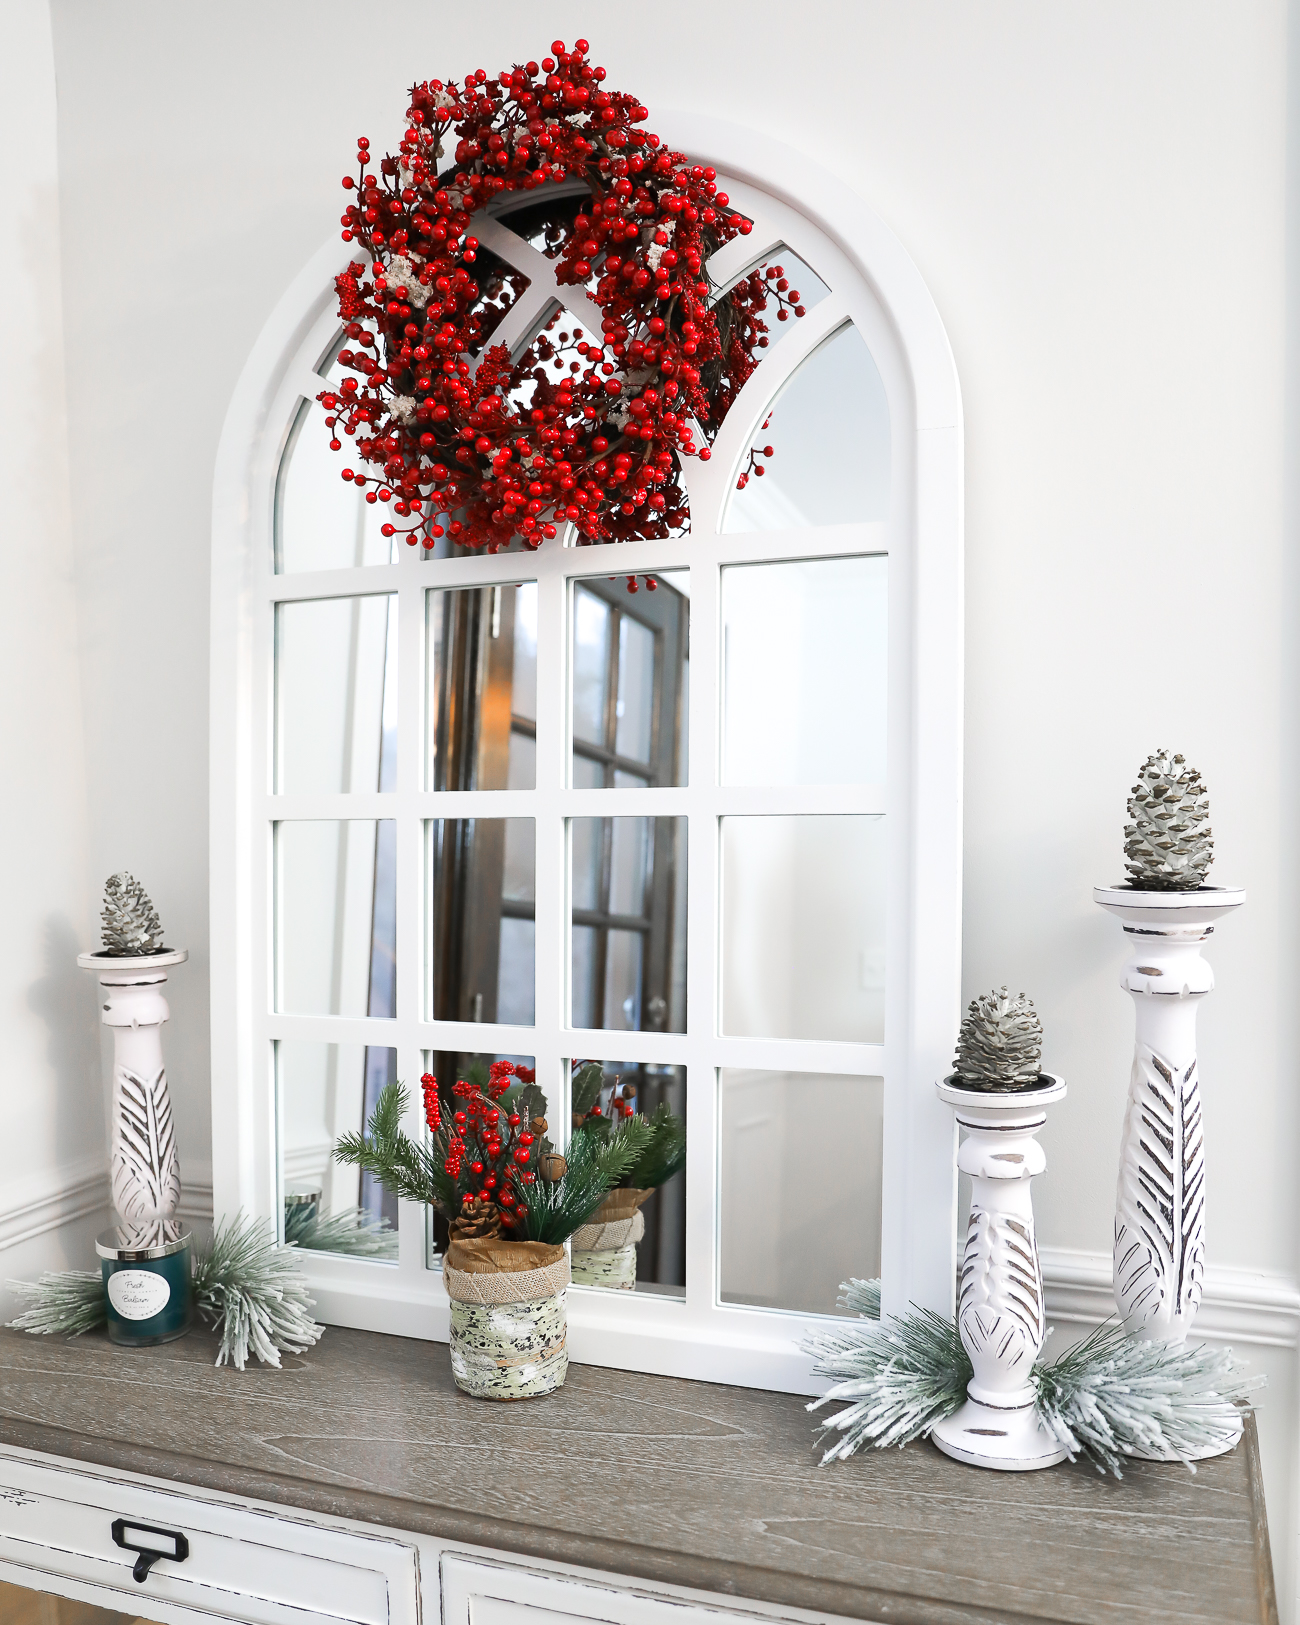 HOME DEPOT HOME DECOR FARMHOUSE FRONT ENTRY WAY HOME DECOR WHITE ENTRY TABLE WINDOW MIRROR LAURA BEVERLIN HOME